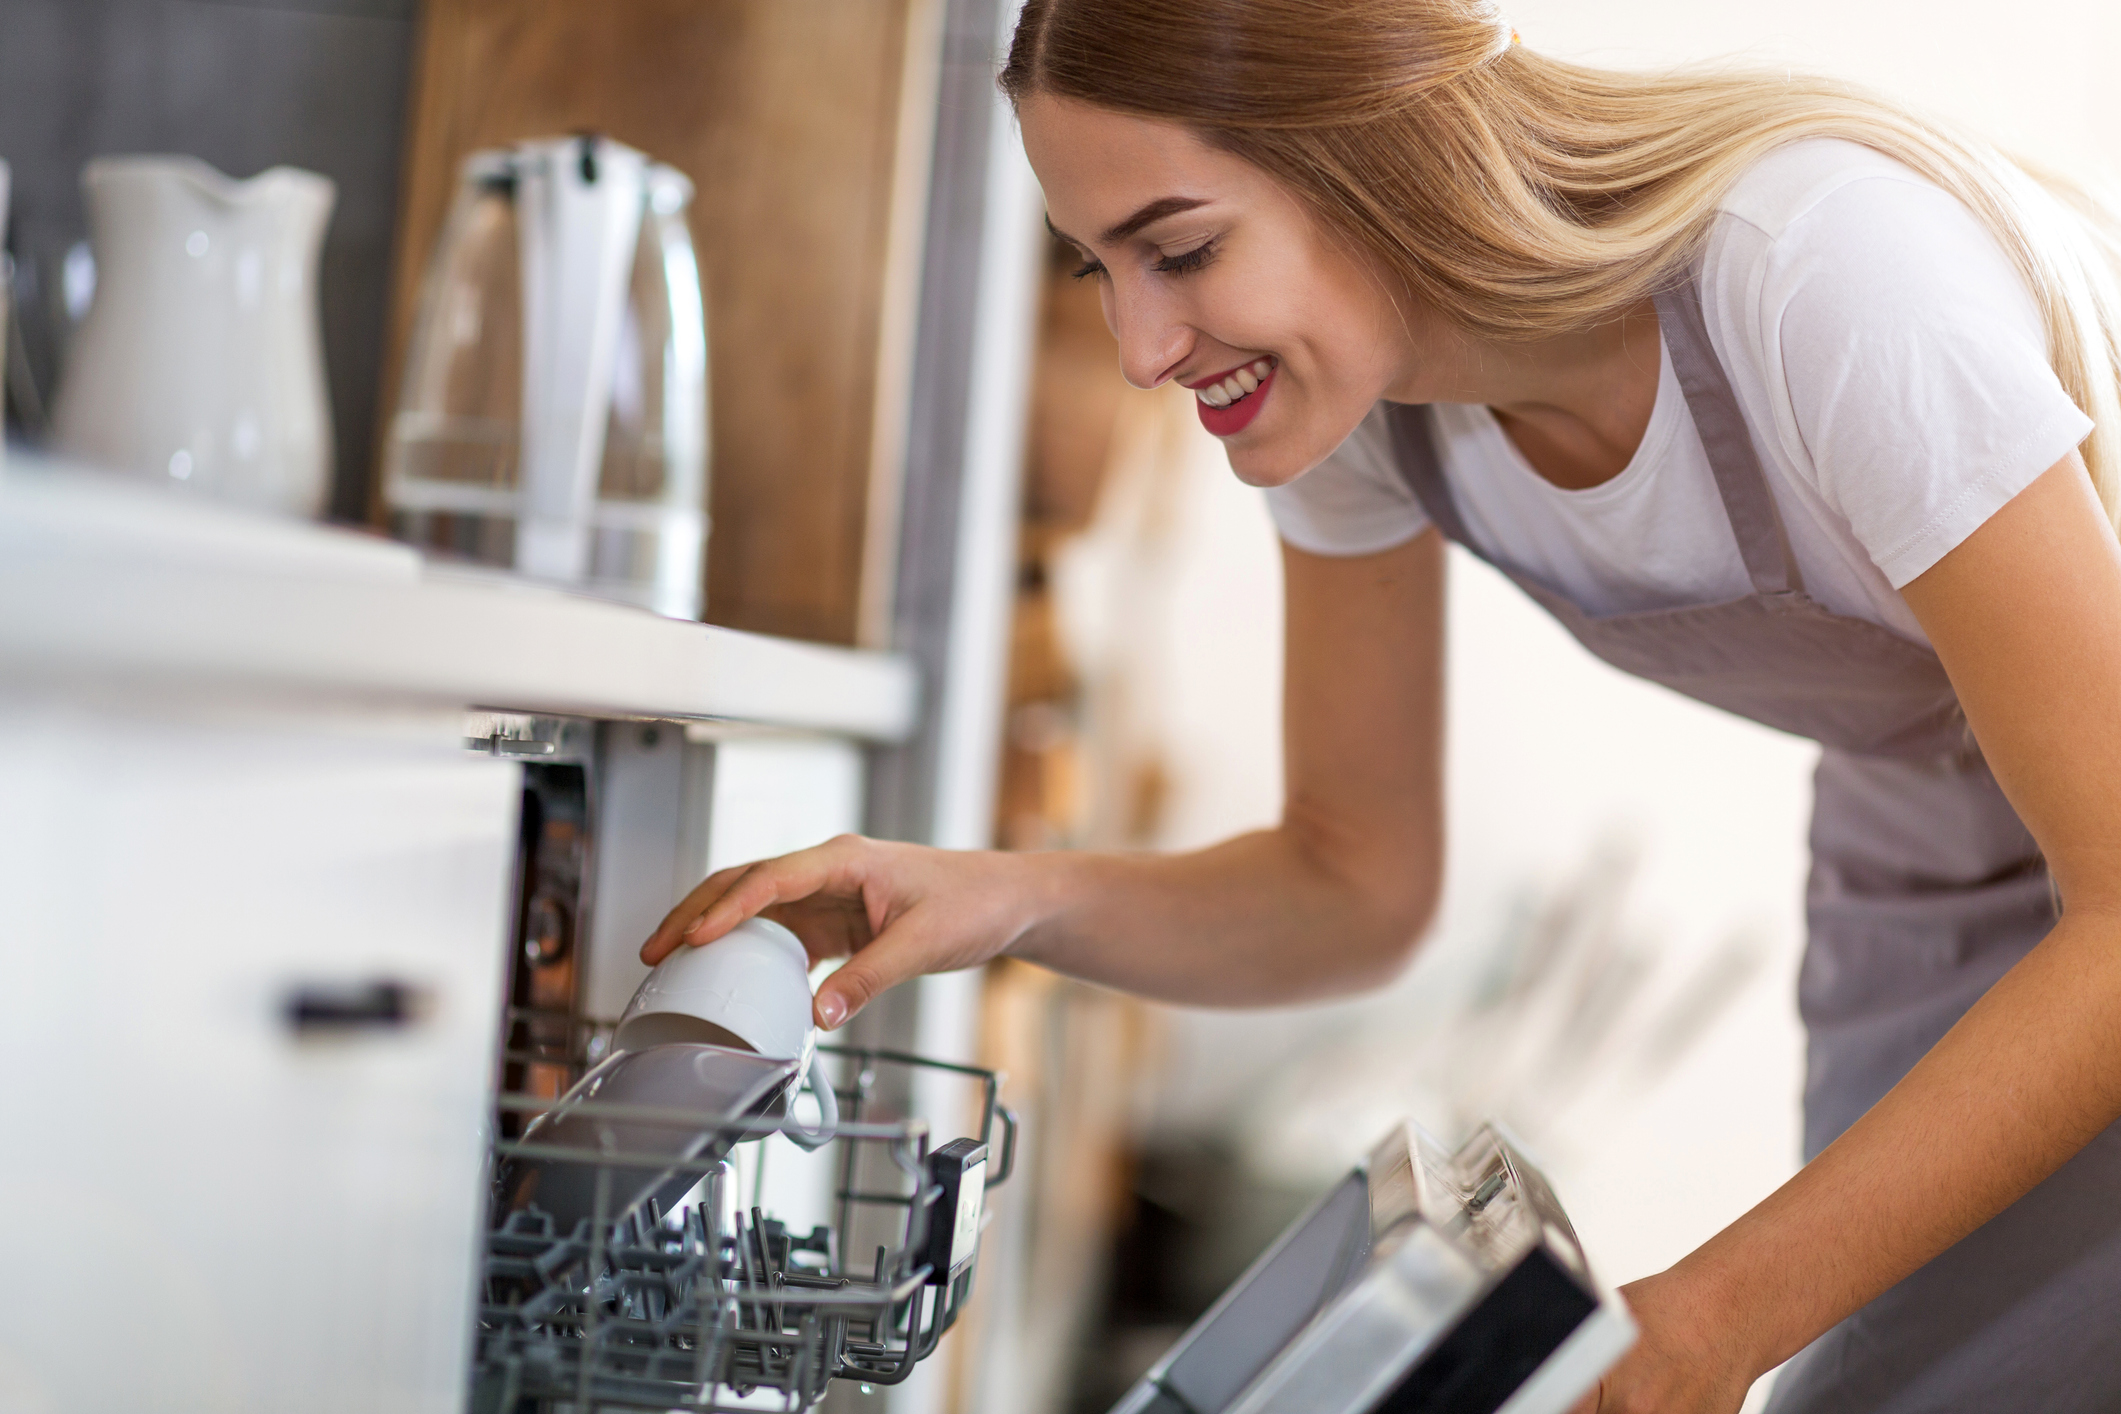 young woman loading the dishwasher